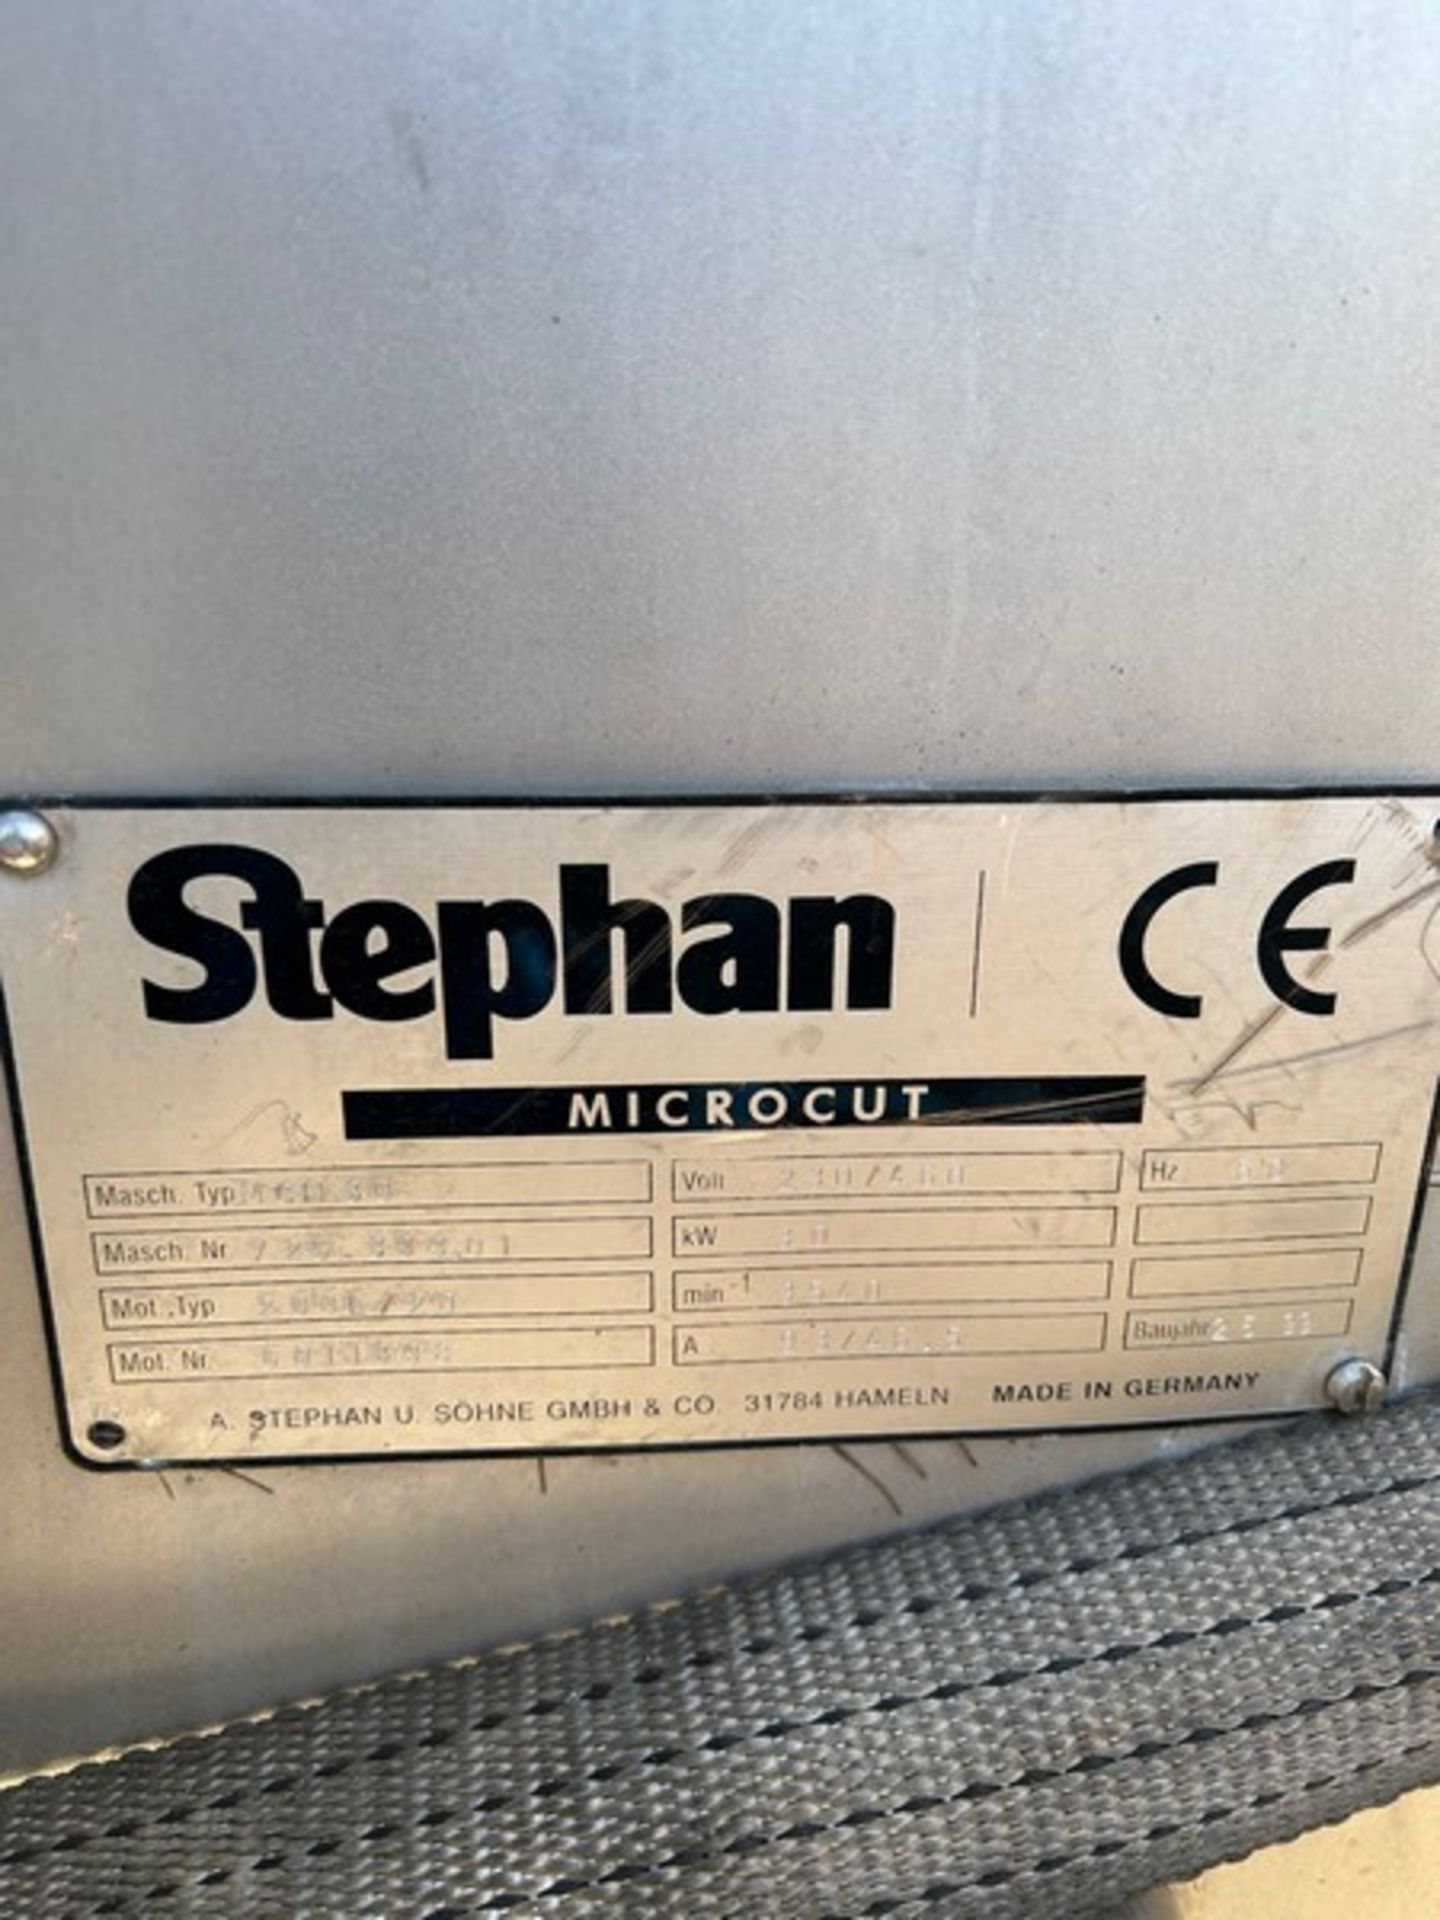 Stephan MCH 30 Emulsifier, Type CH80, S/N 725.399.01, 230/360 V, 60 Hz, kW 30, Min -1: 3540 (Located - Image 5 of 5